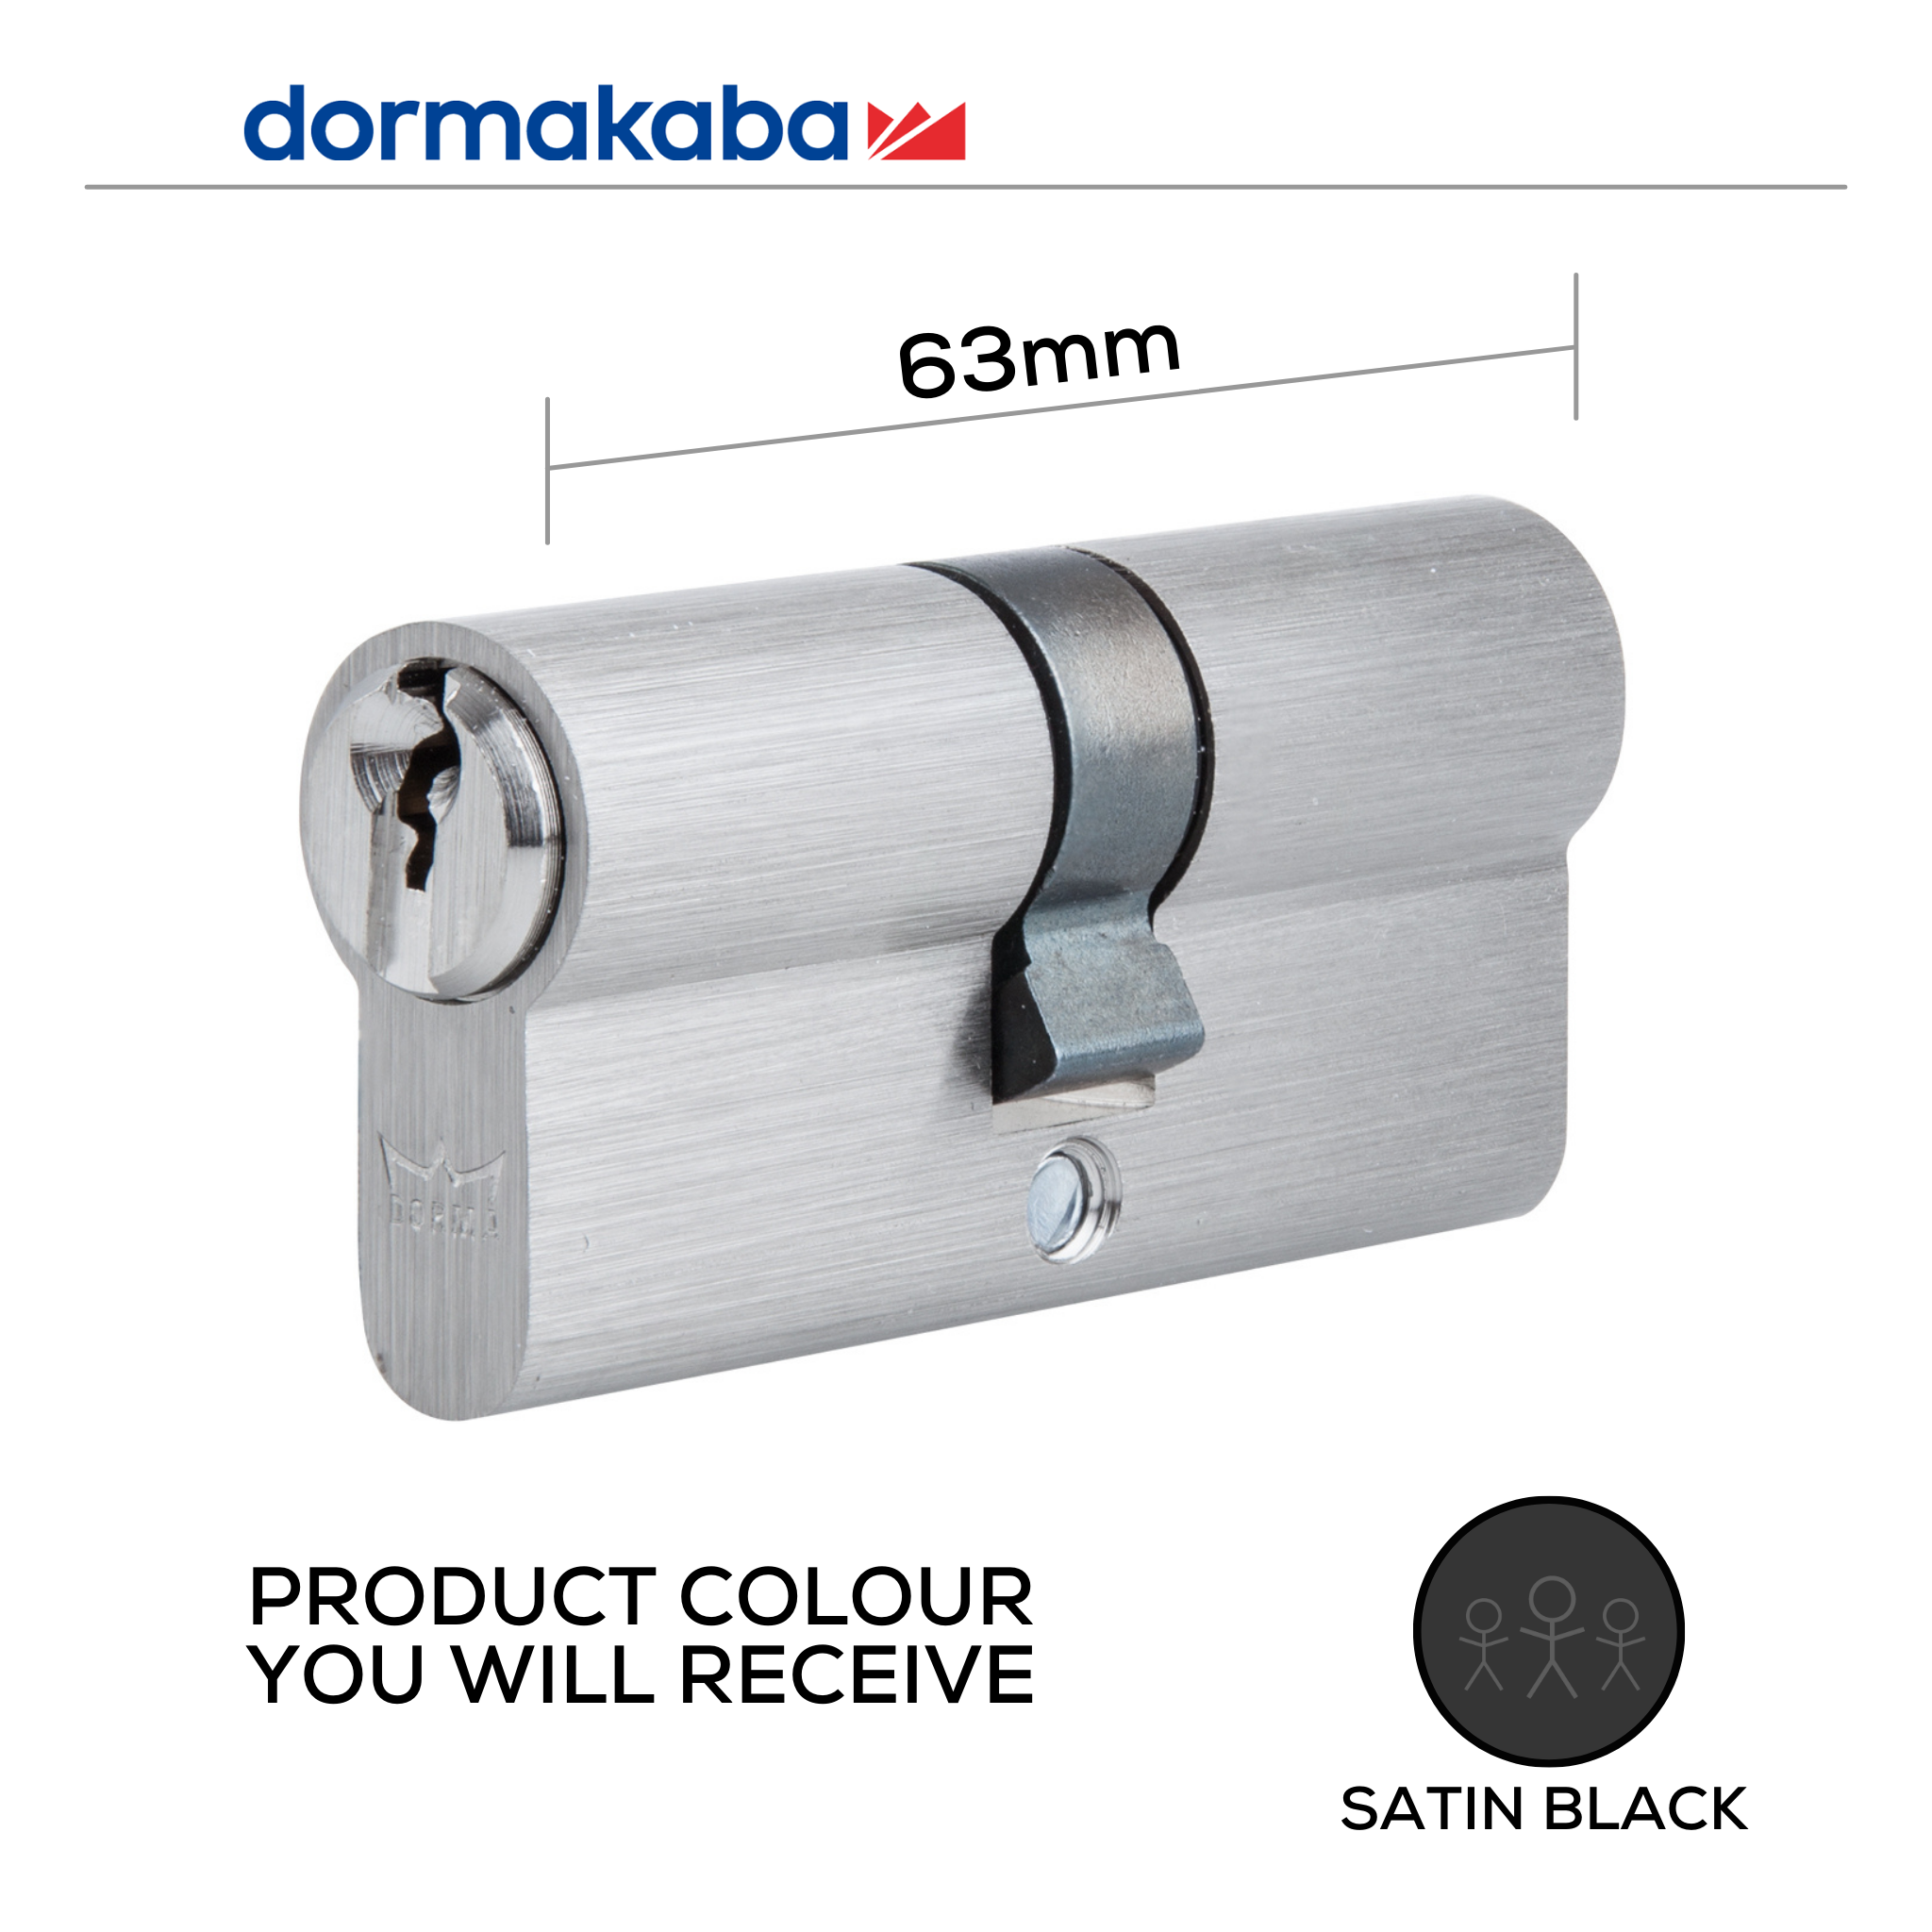 DDC206302 KD, 63mm (l), Double, Cylinder, Keyed Different, 5 Pin, Satin Black, DORMAKABA